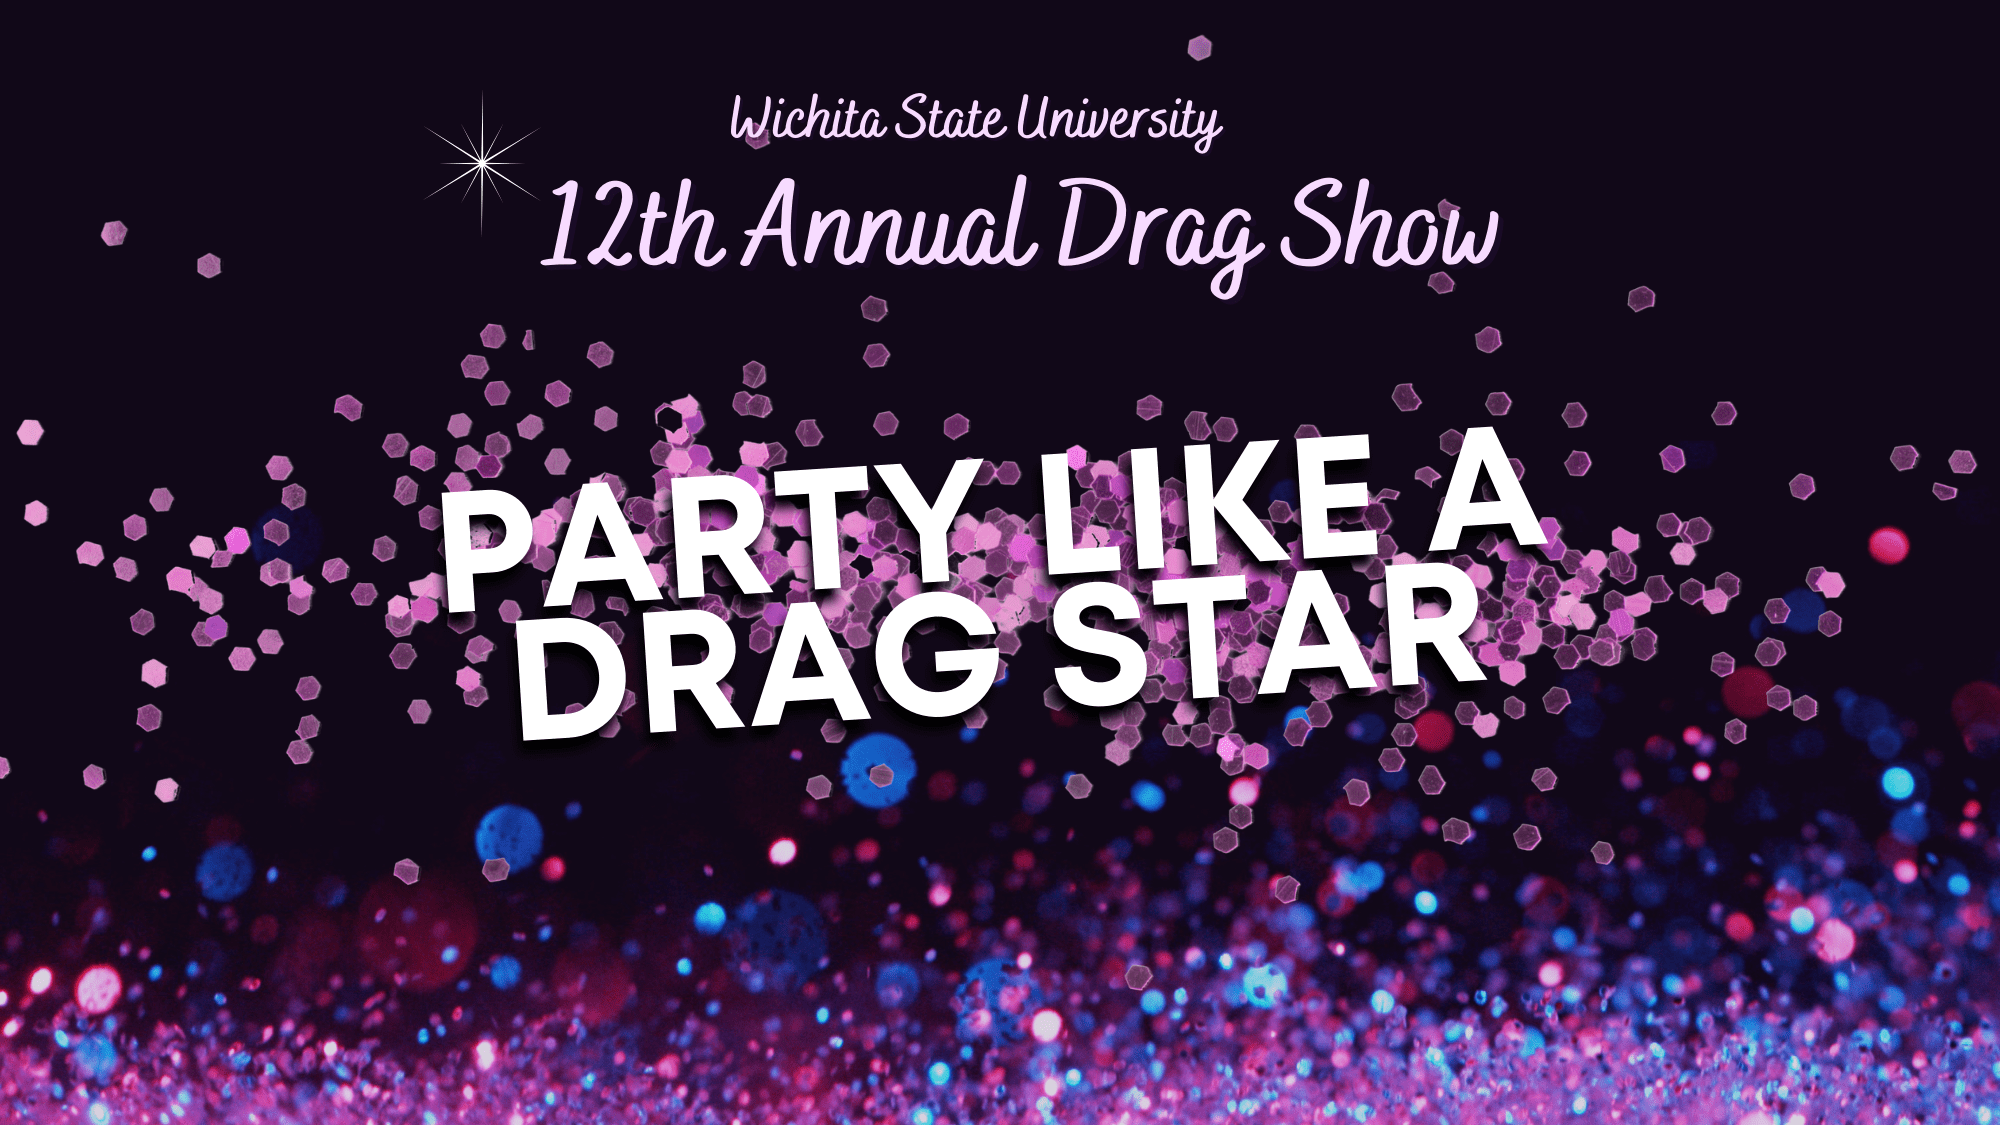 Wichita State University | 12th annual Drag Show | Party Like a Drag Star